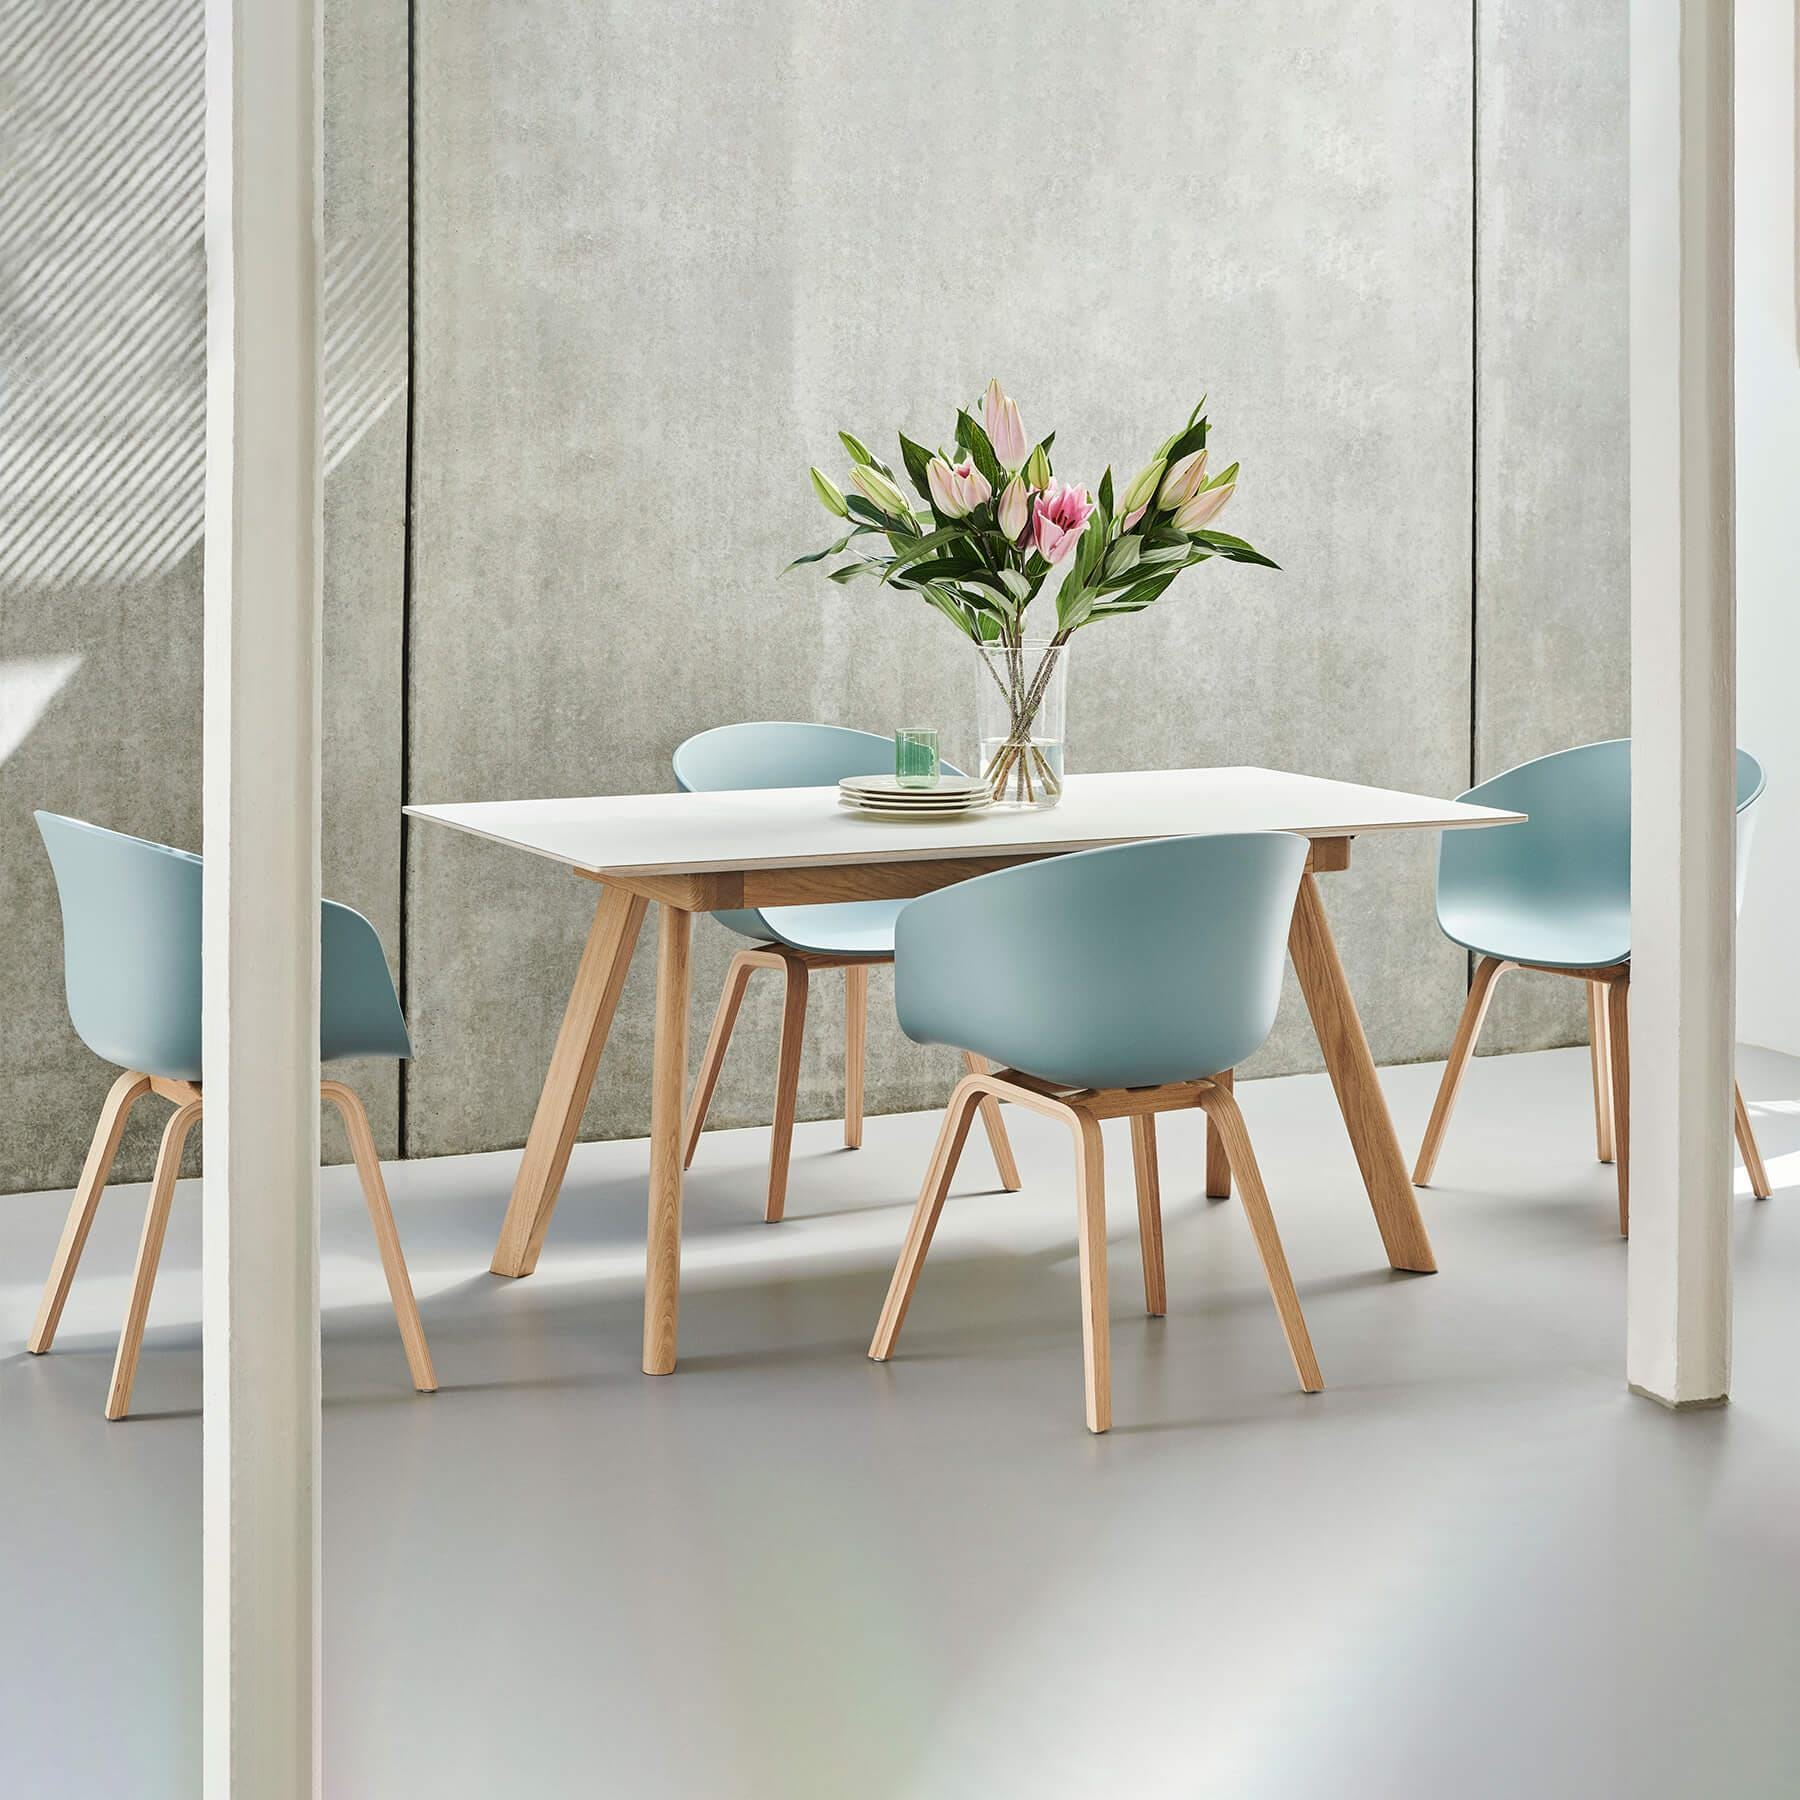 Hay Family Dining Bundle With 4 Chairs Cph30 Table No Extension Aac 22 Chair Dusty Blue Shell Multi Designer Furniture From Holloways Of Ludlow